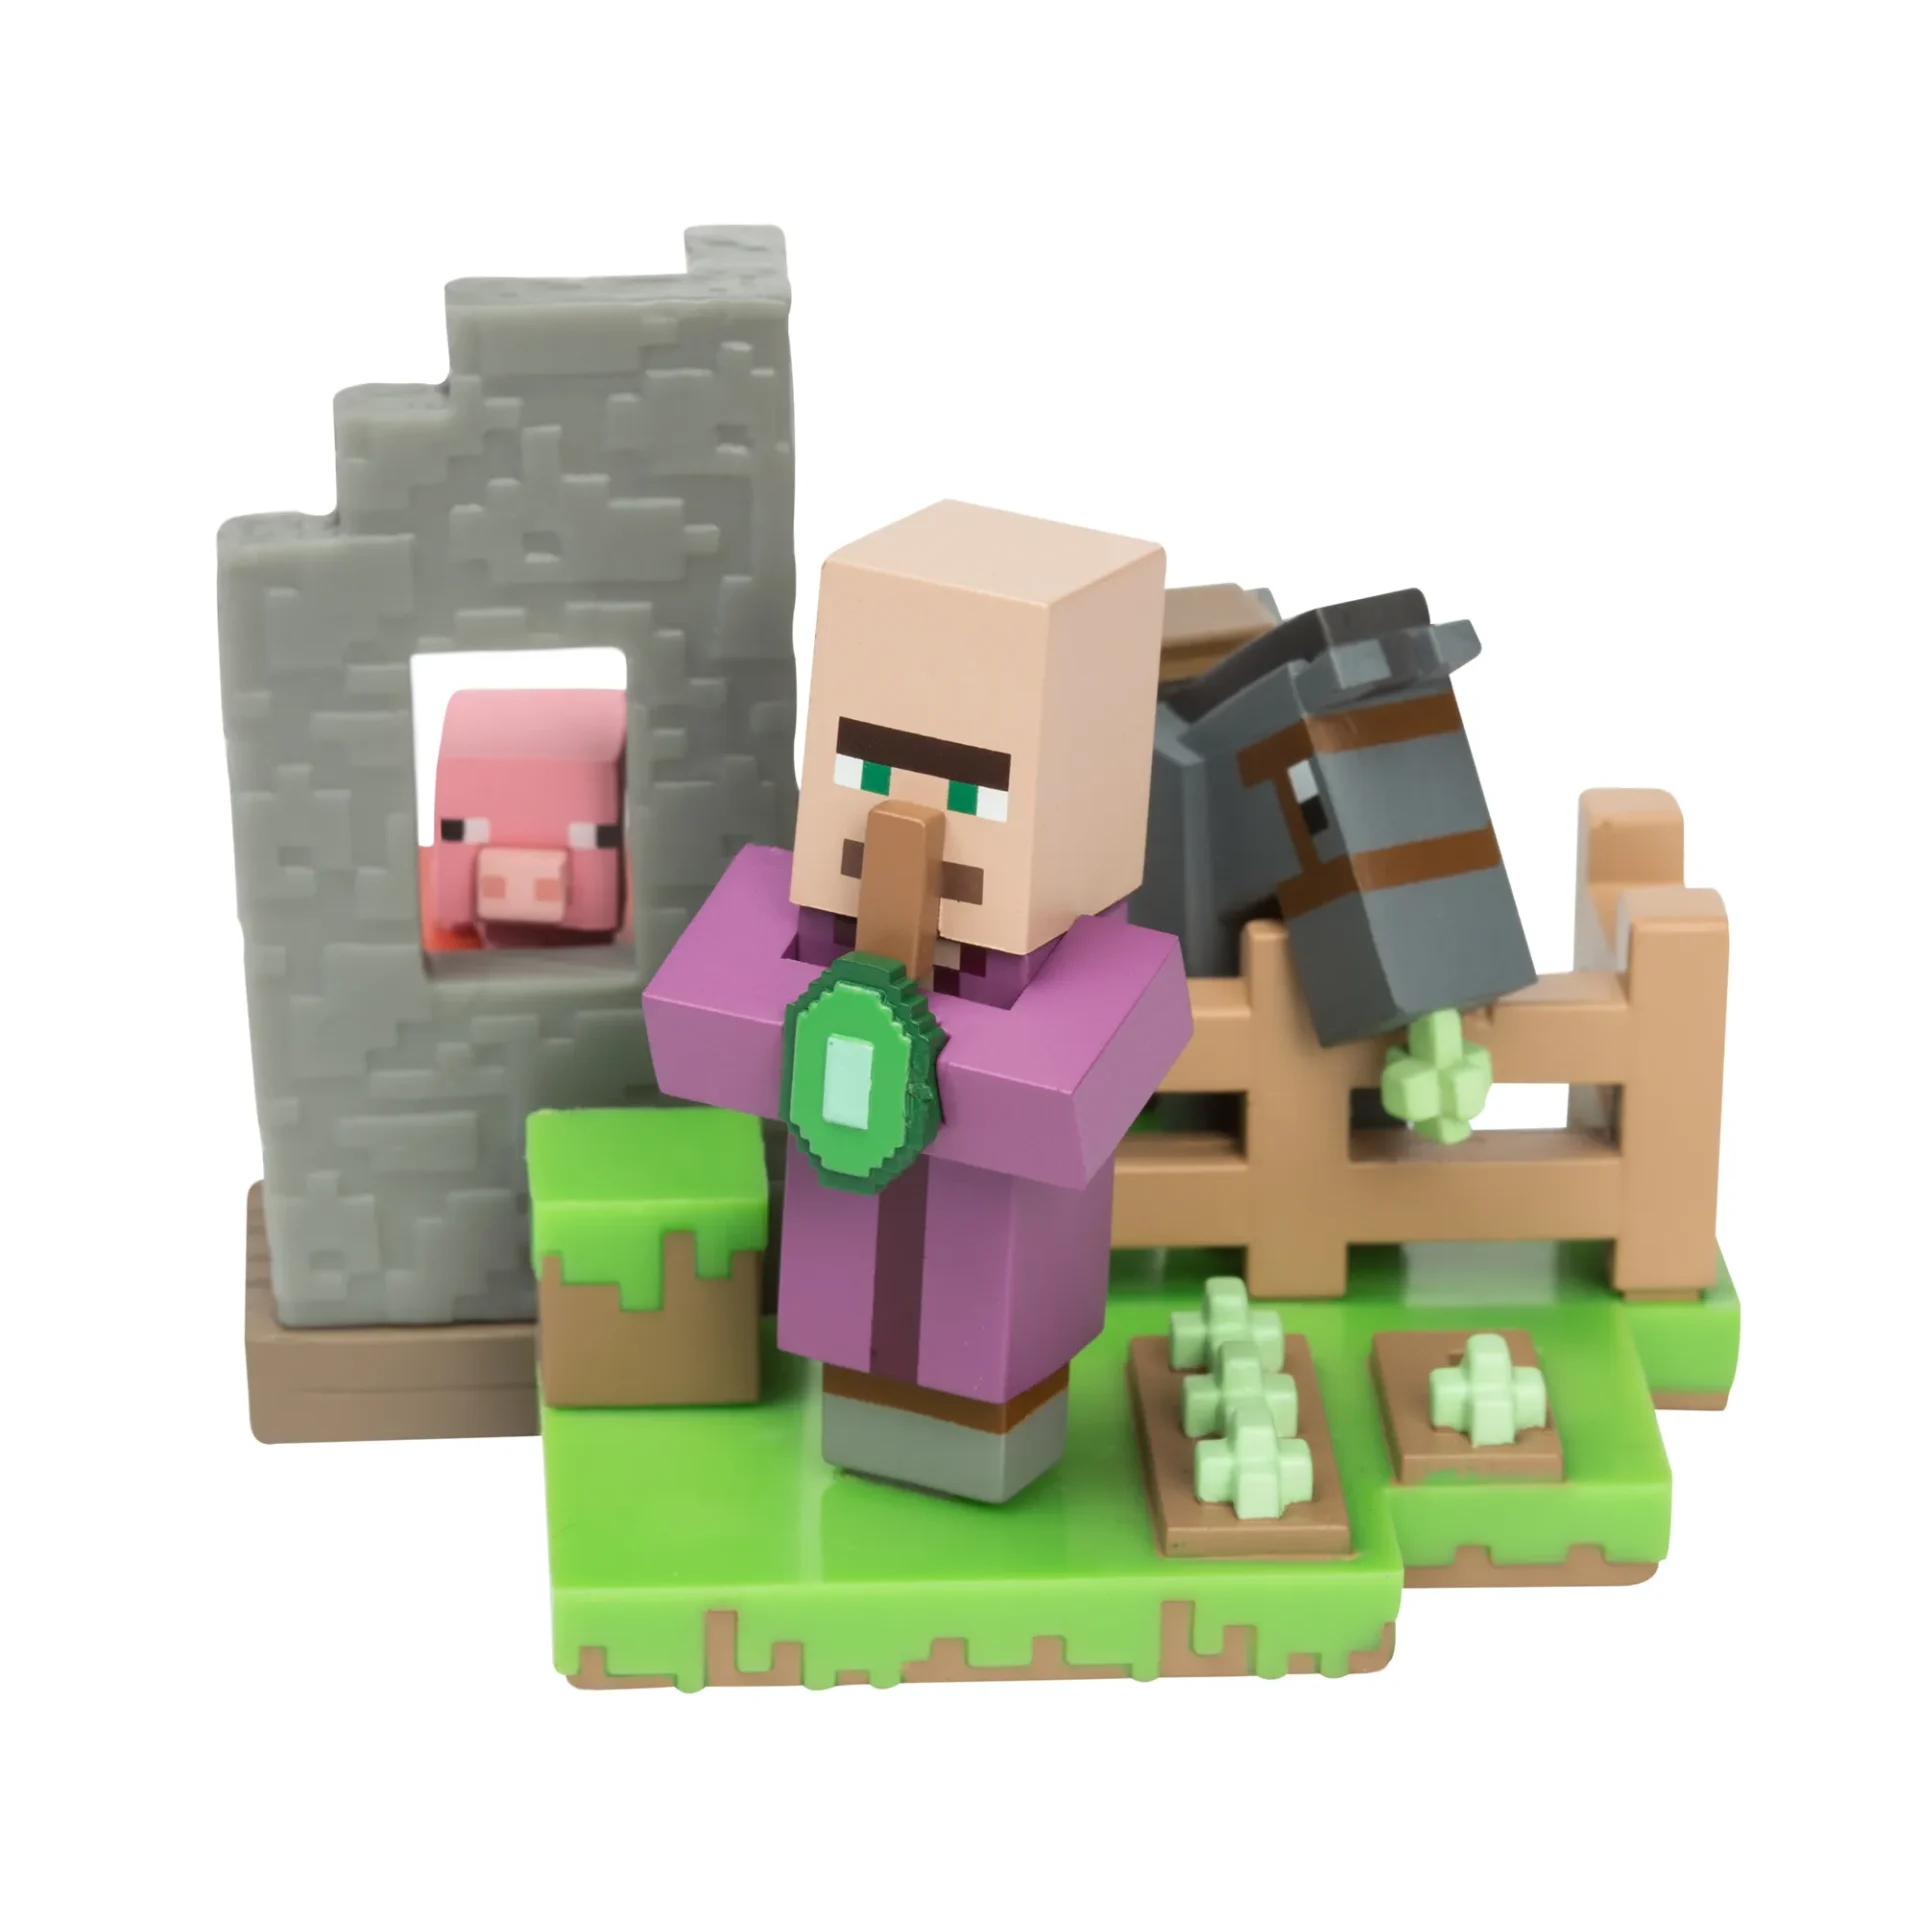 A minecraft toy with a pig in front of it.